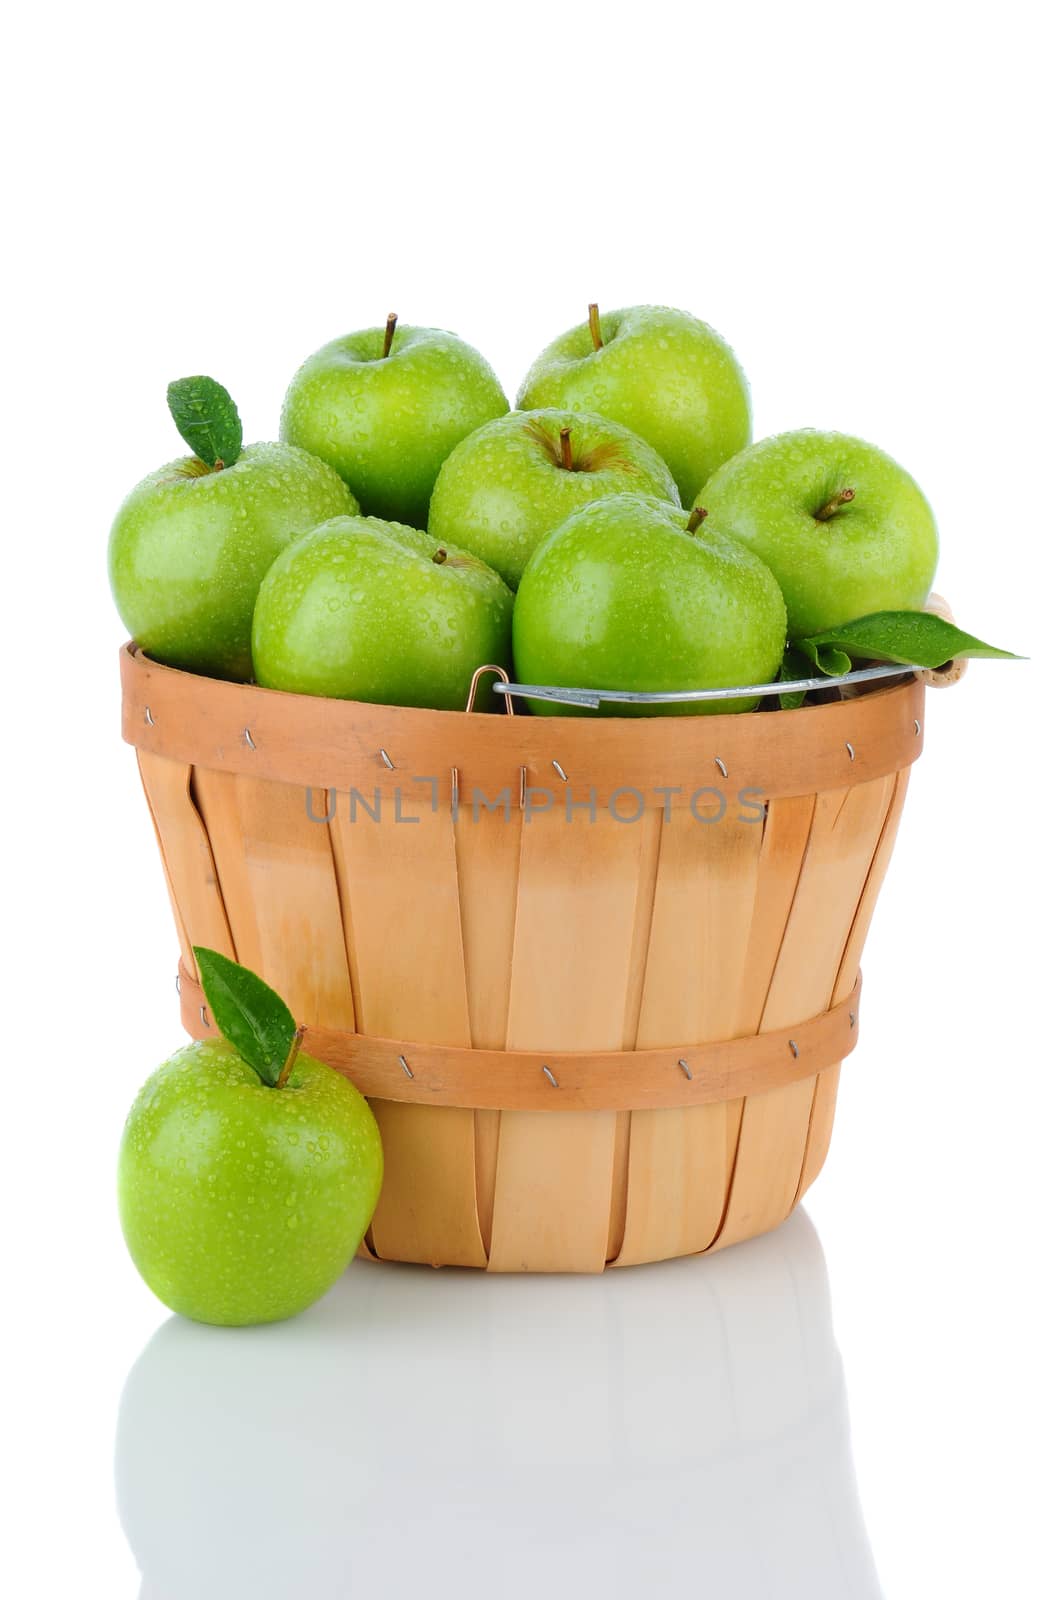 Granny Smith Apples in a Basket by sCukrov